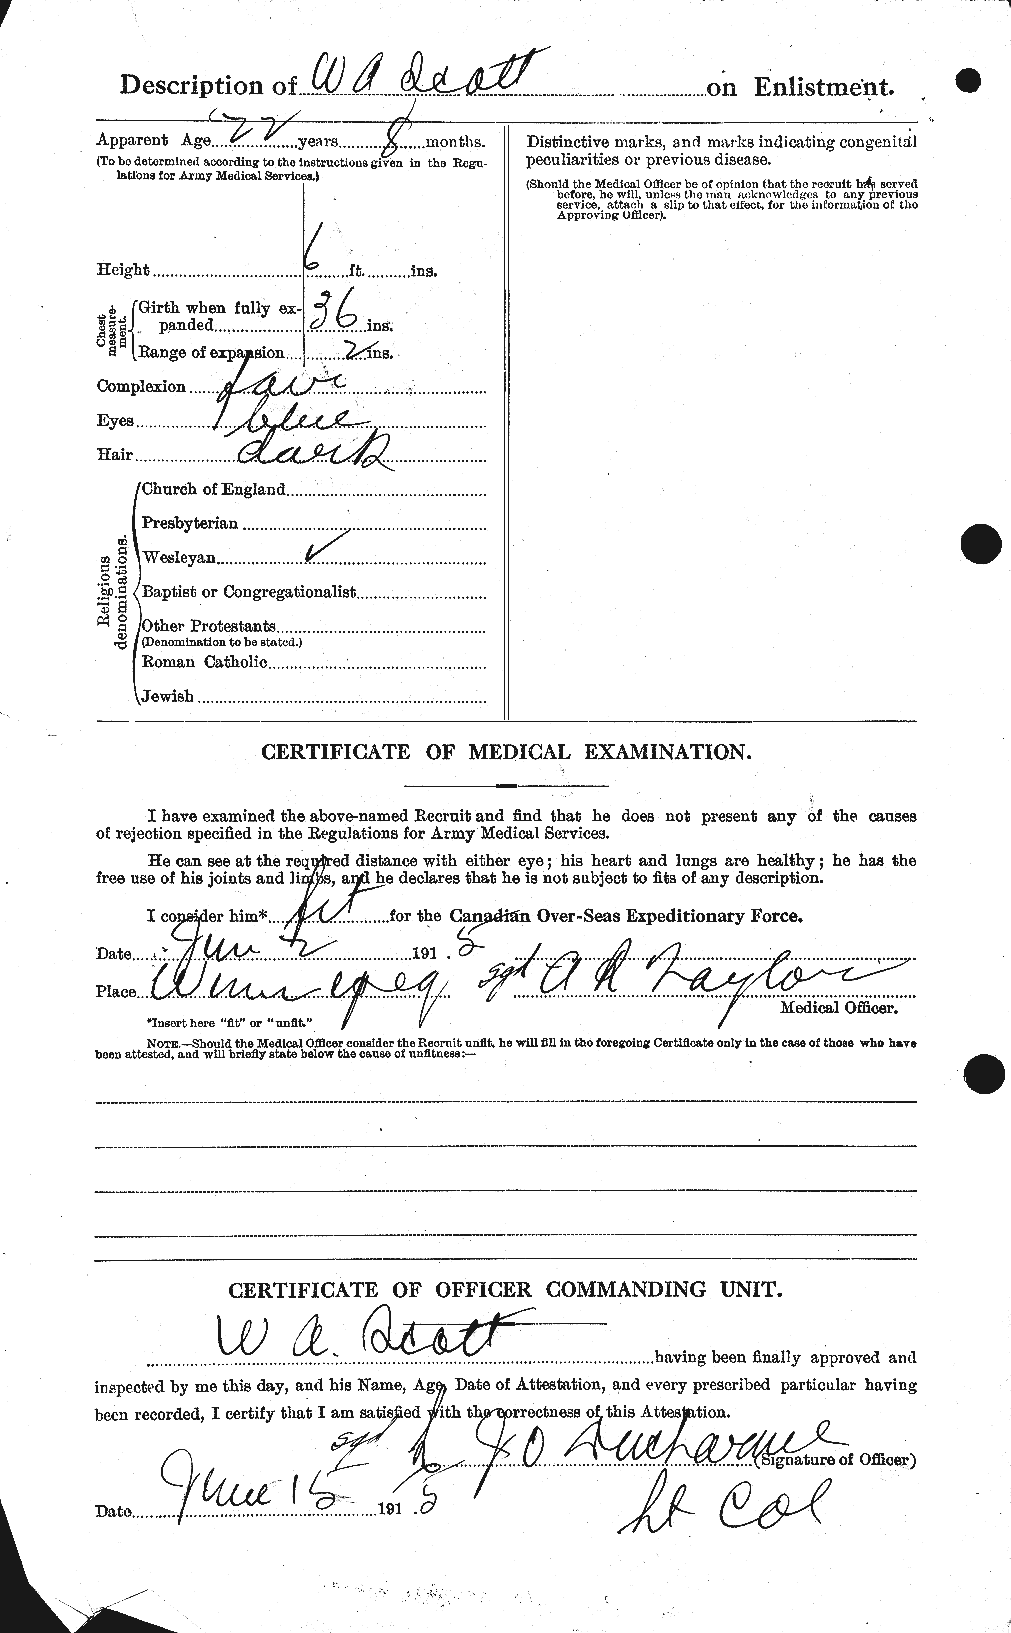 Personnel Records of the First World War - CEF 088198b